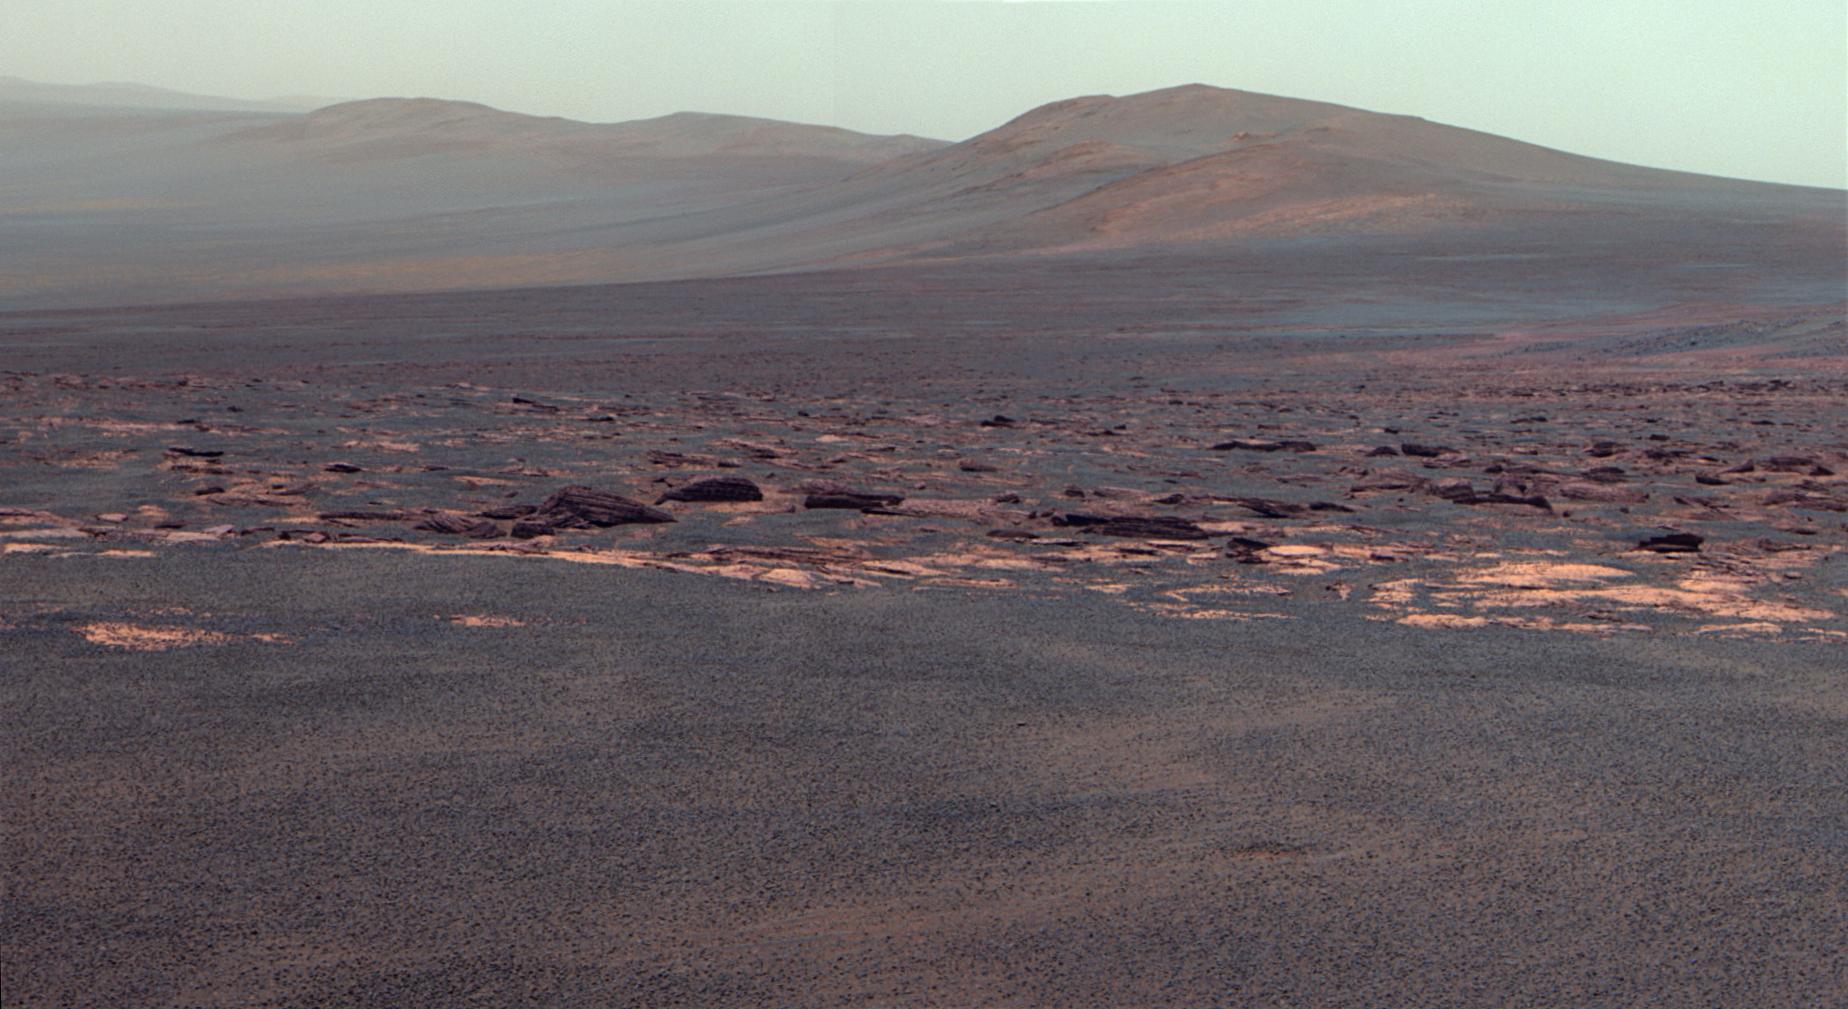 Western Rim of Endeavour Crater Mars